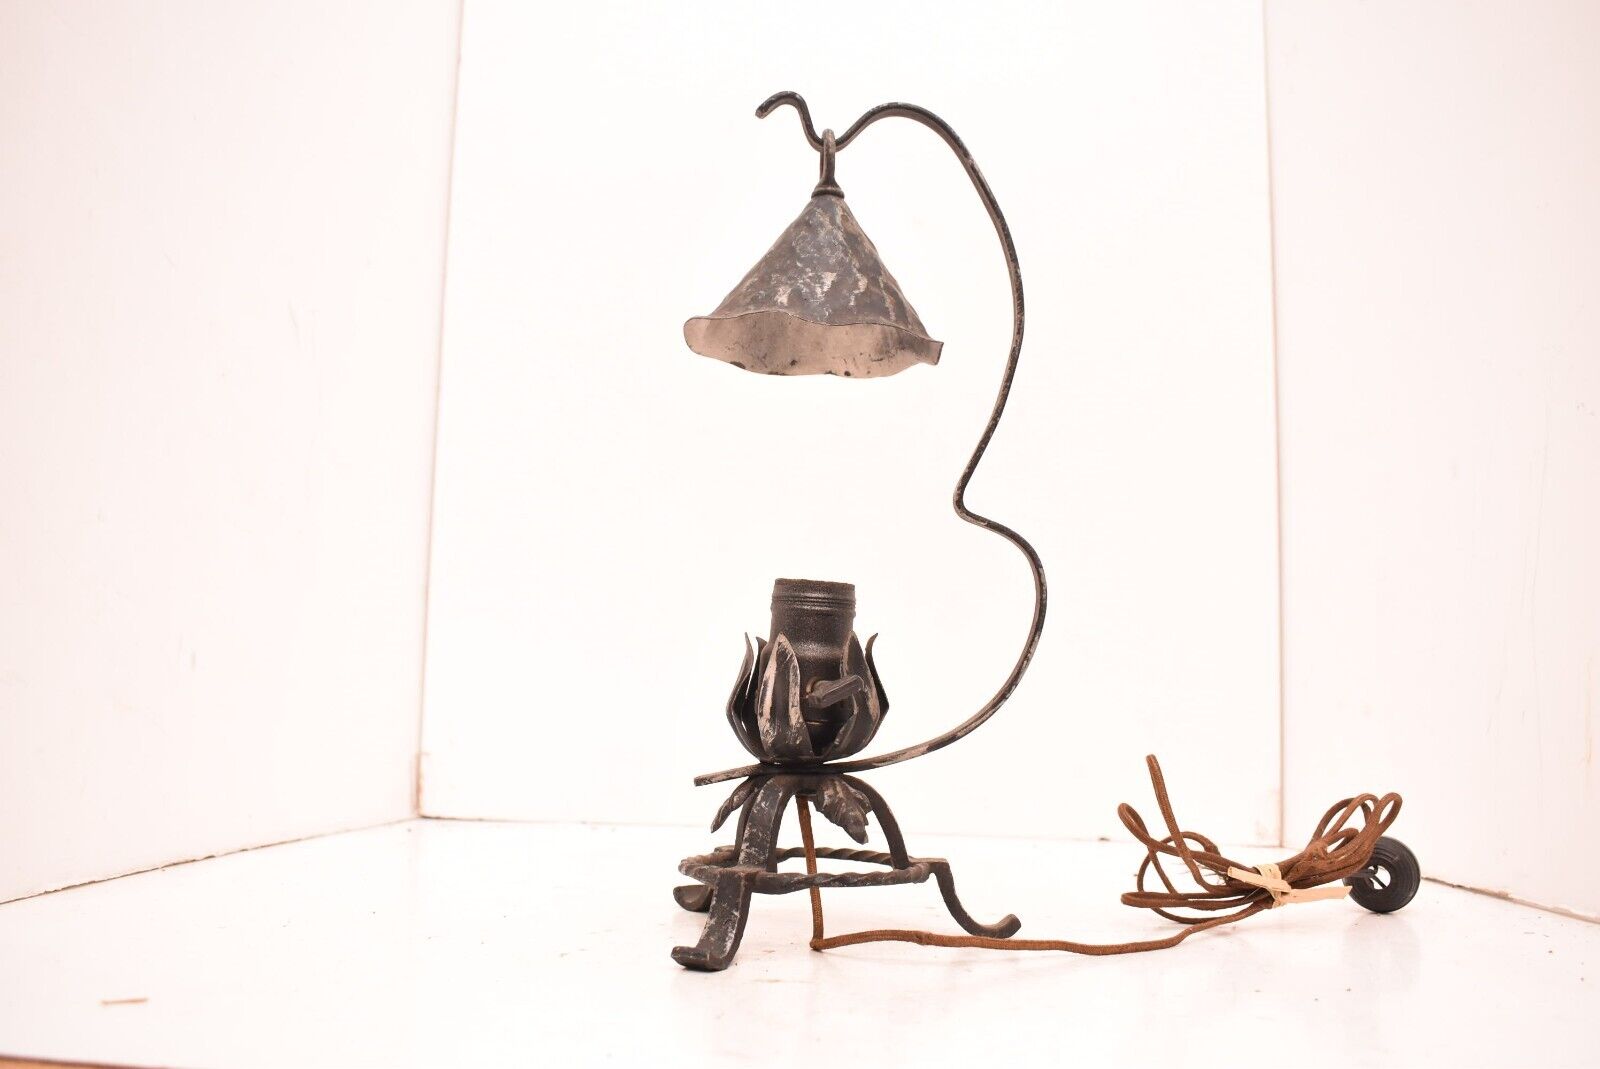 Antique Arts & Crafts Iron Gothic Storybook Table / Bedside Lamp fairy Tea Lamp